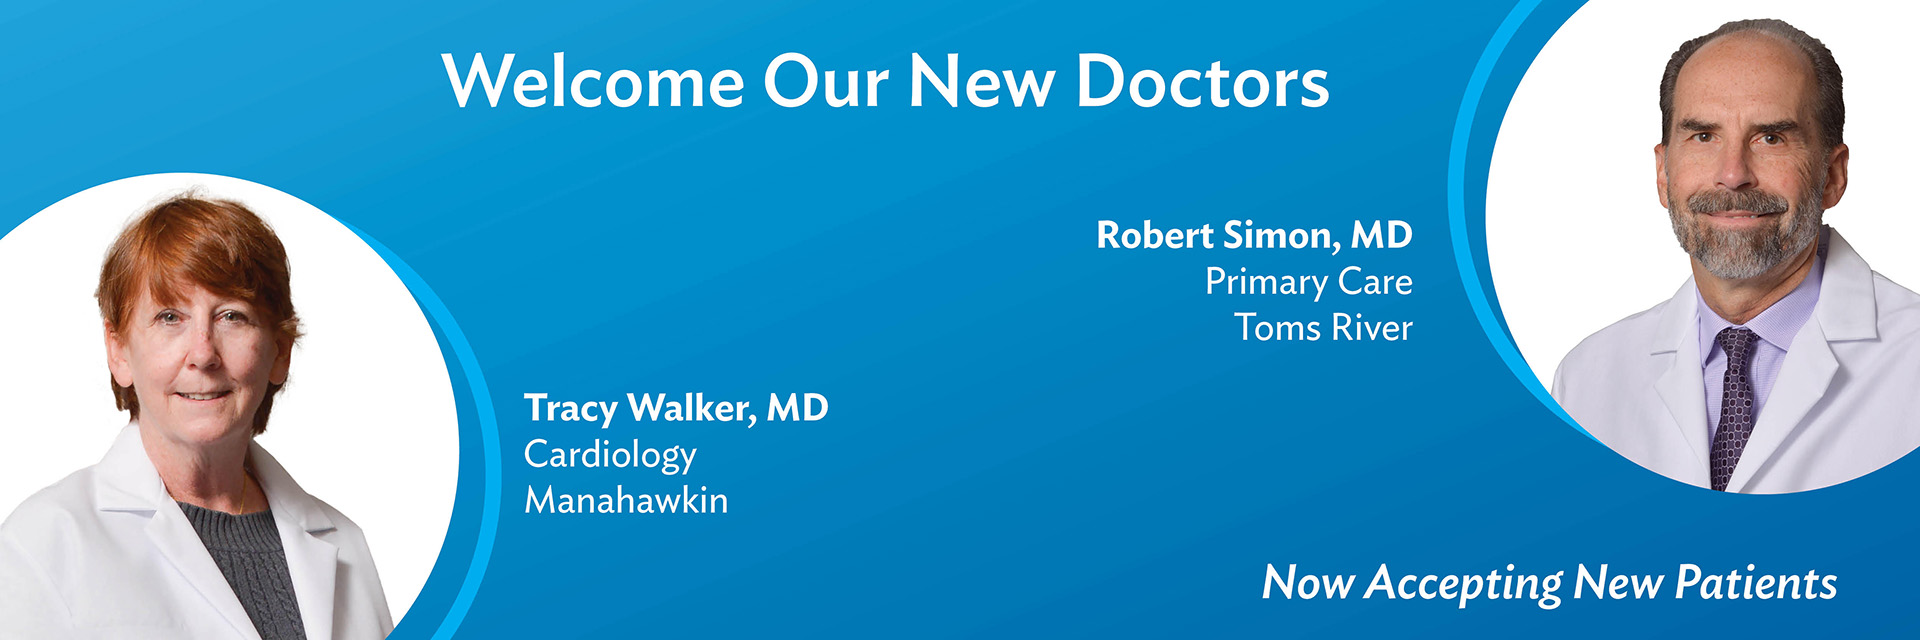 Welcome Our New Doctors | Robert Simon, MD Primary Care Toms River | Tracy Walker, MD Cardiology Manahawkin